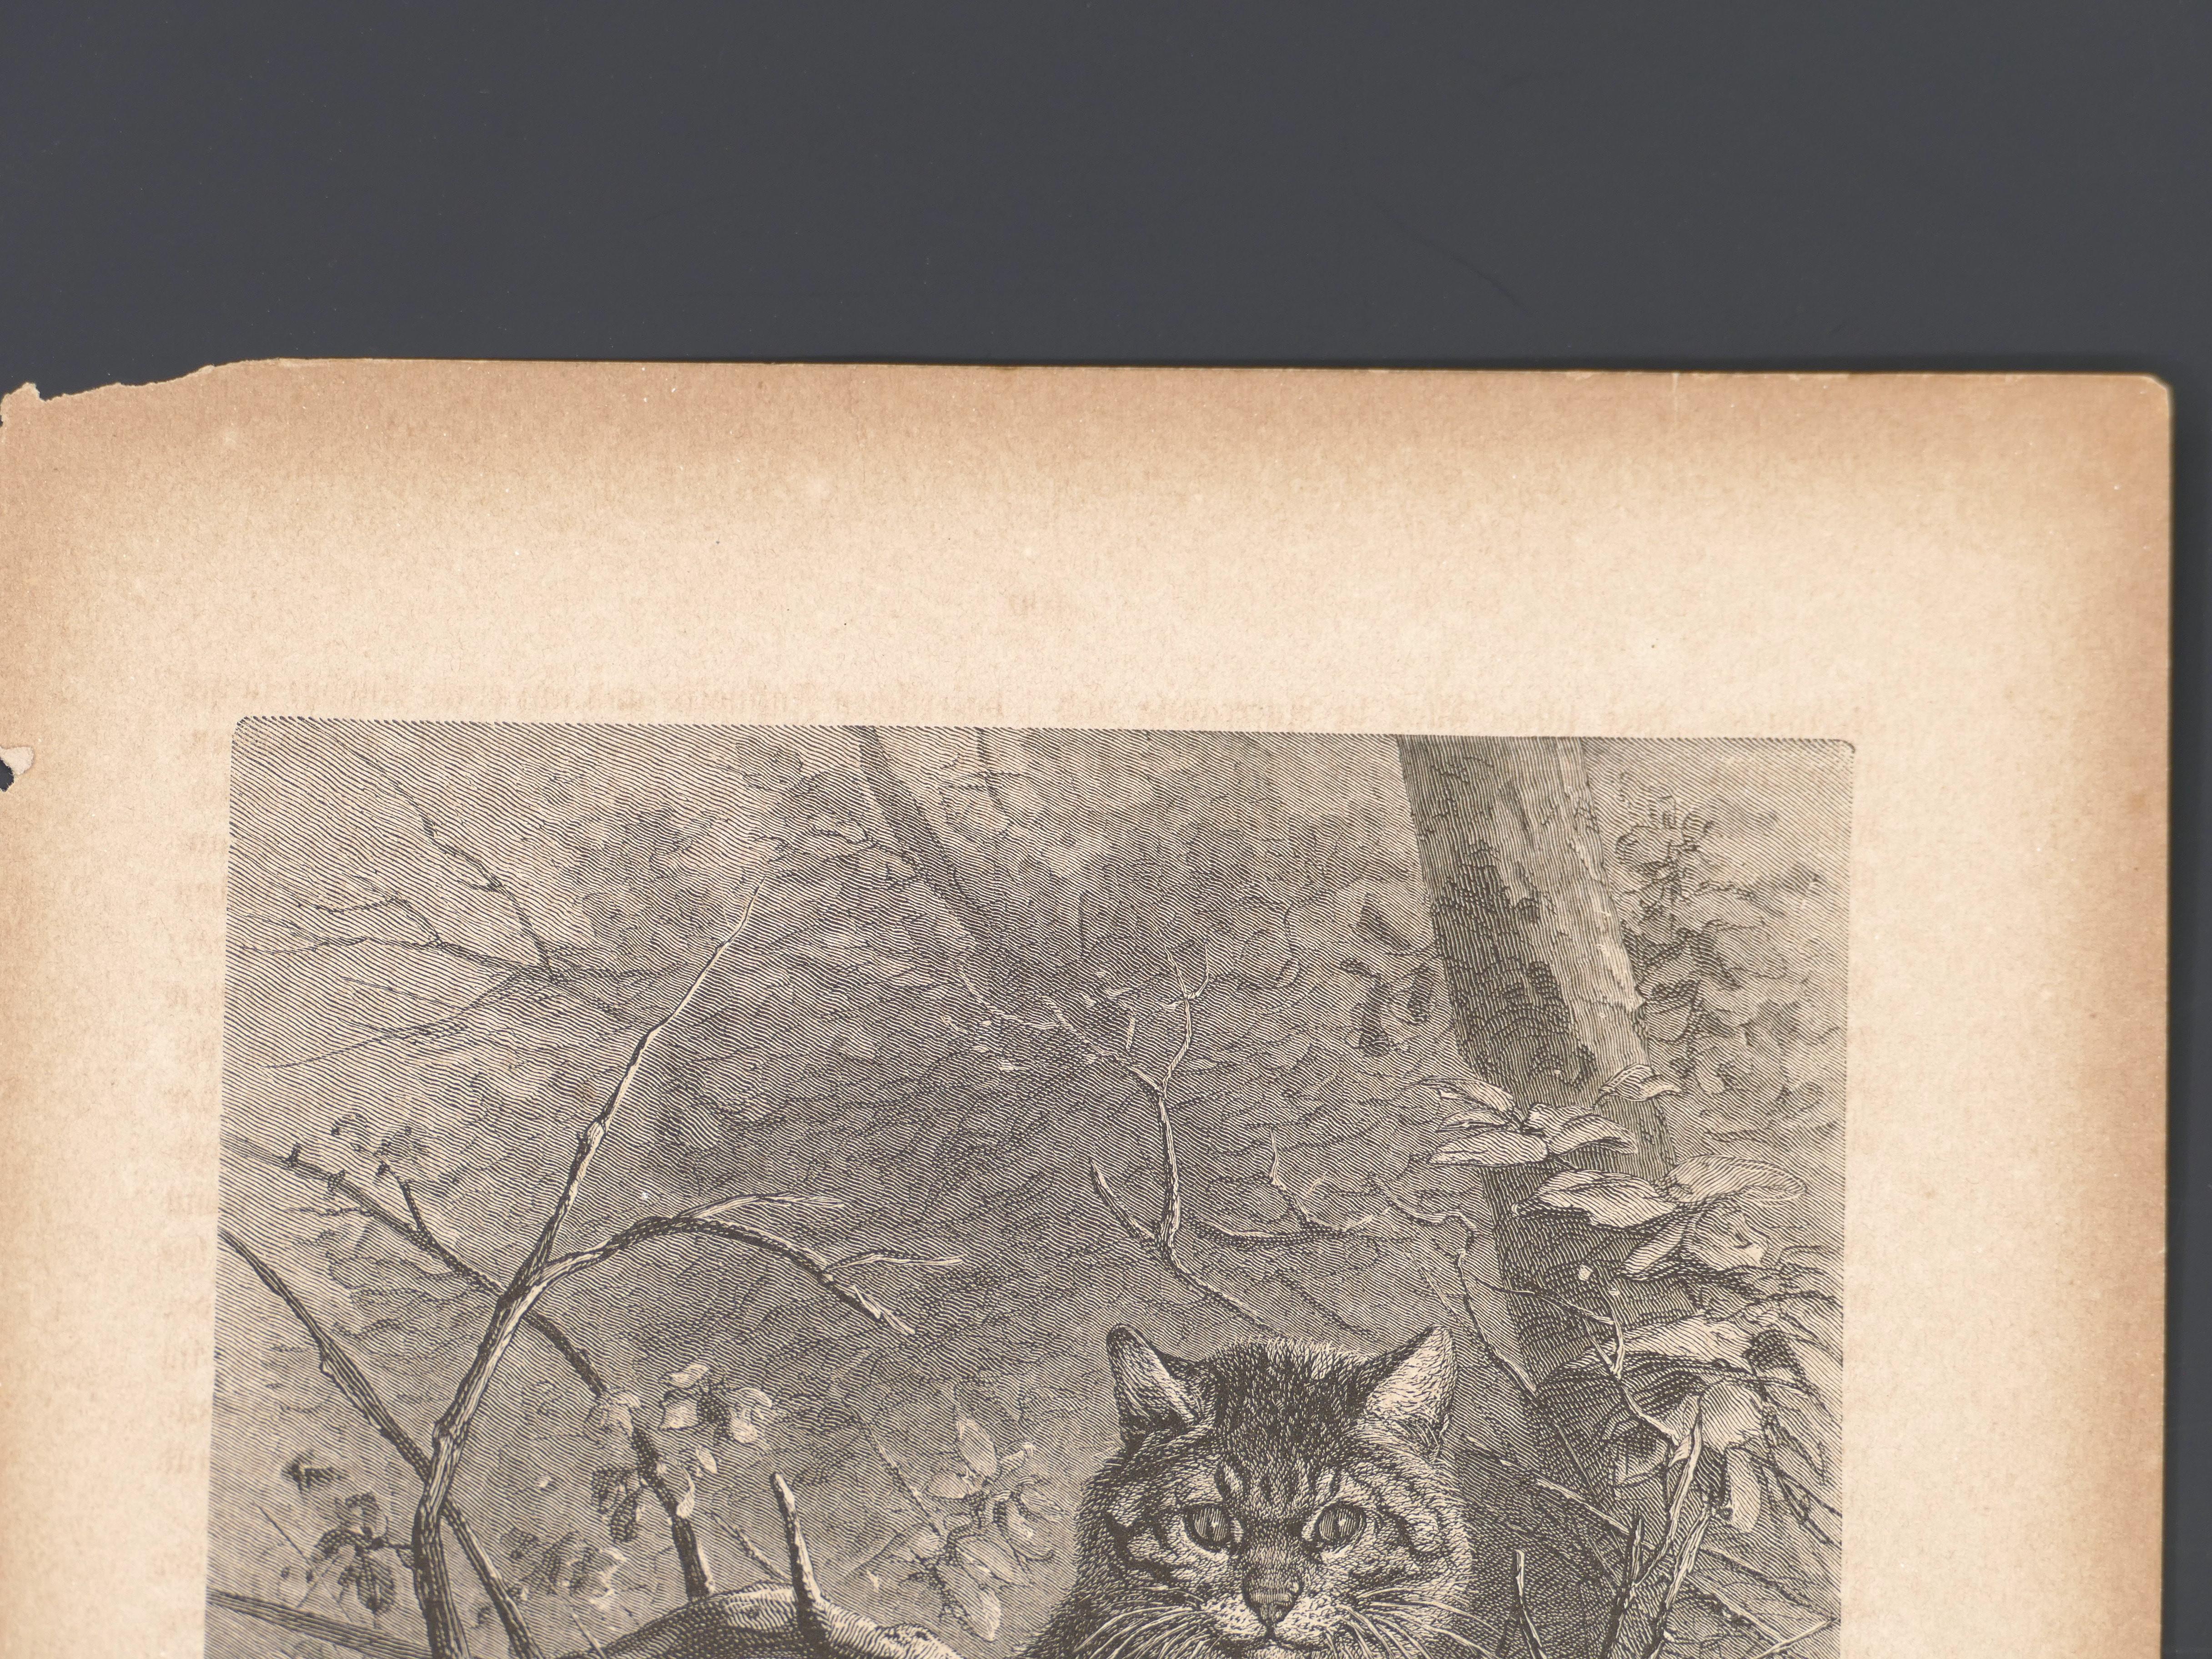 Image dimensions:  19,8 x 13,8  cm.

A Cat Hidden in the Tree is an original print realized by an anonymous illustrator in 1880.

Black and white lithograph. Original Title: Wildkatze und Schnepfe.

Good conditions, except for usual yellowing of the